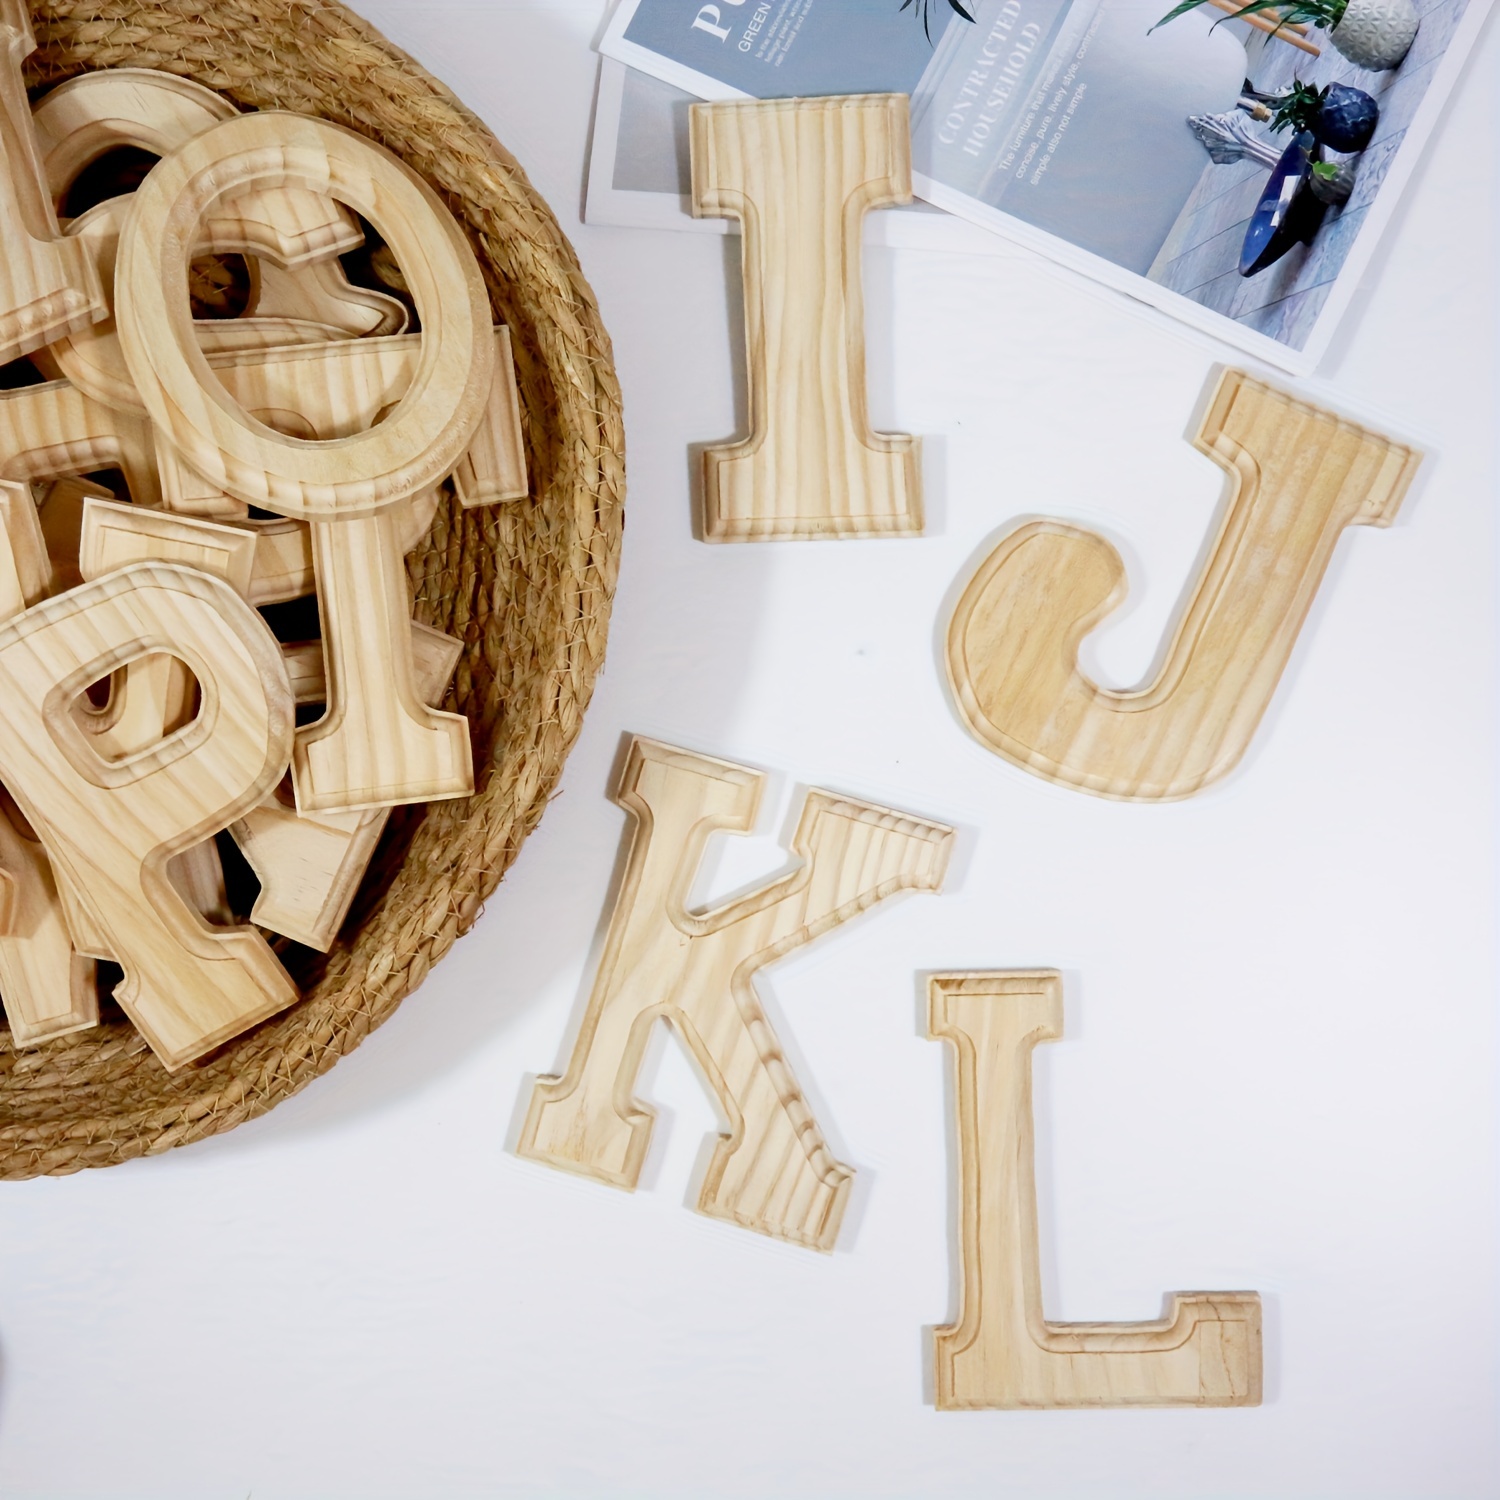  3 Inch Wooden Letters